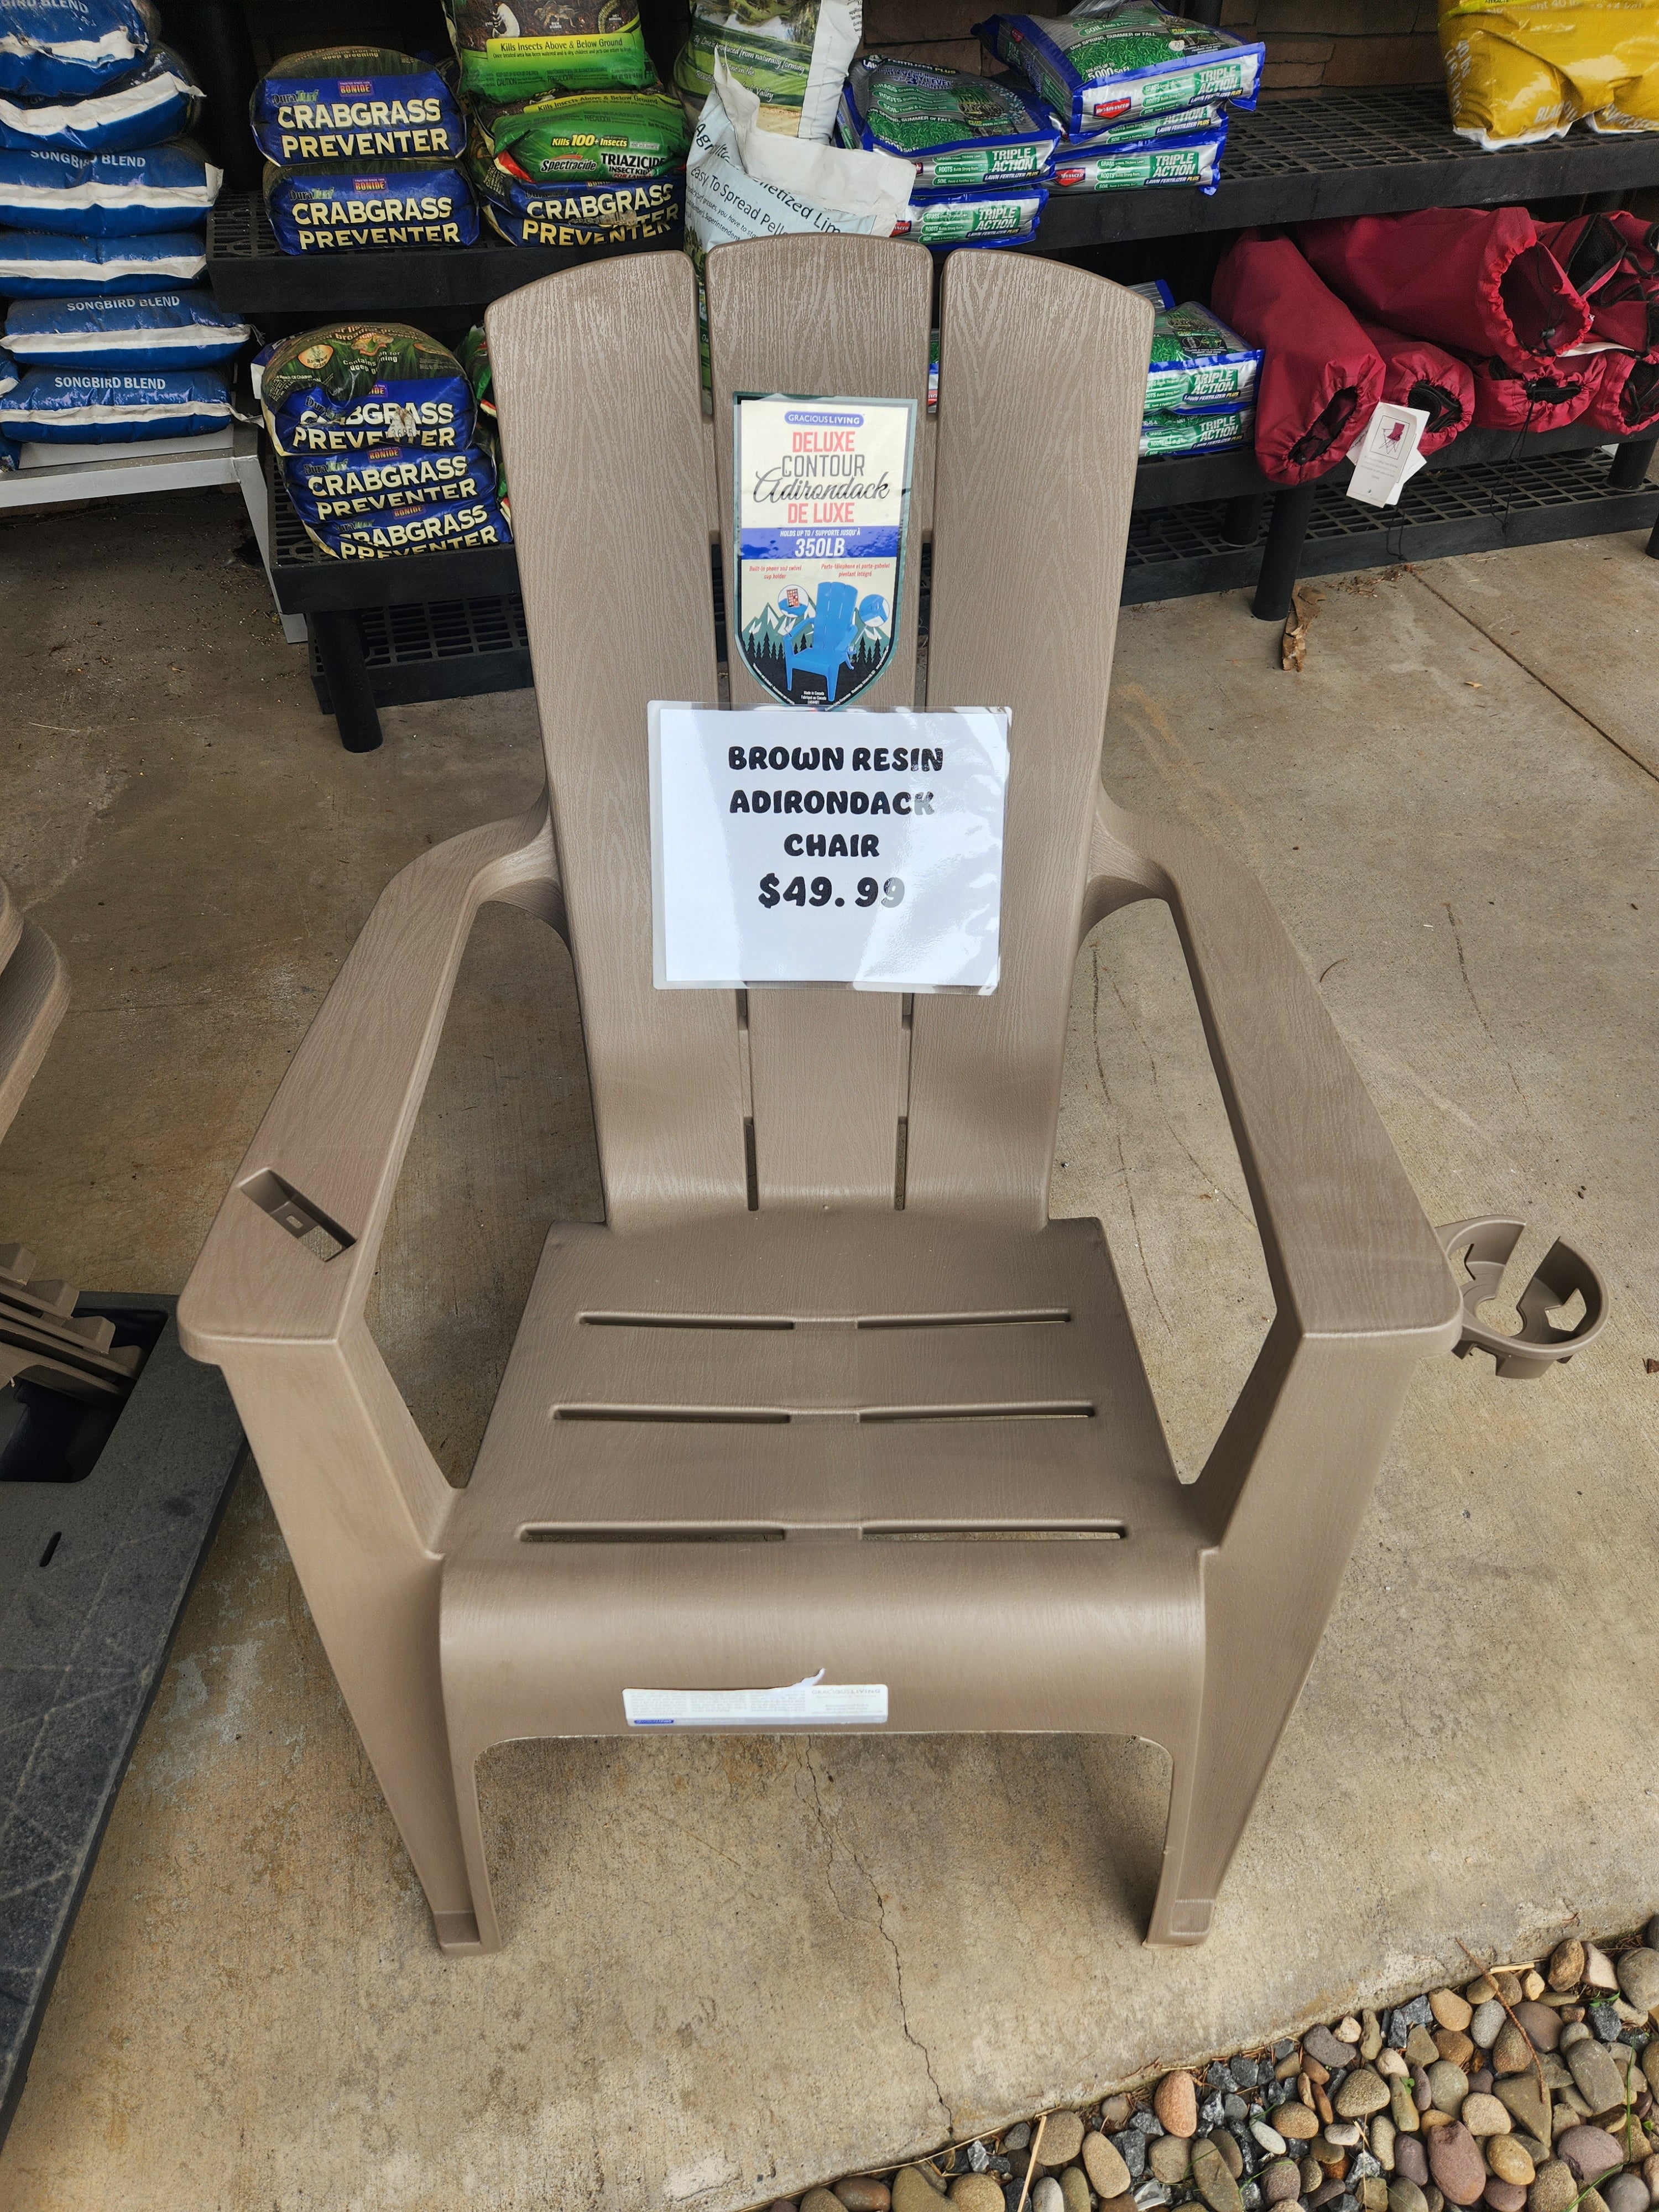 Deluxe Contour Adirondack Chair with Cell Phone & Cup Holder